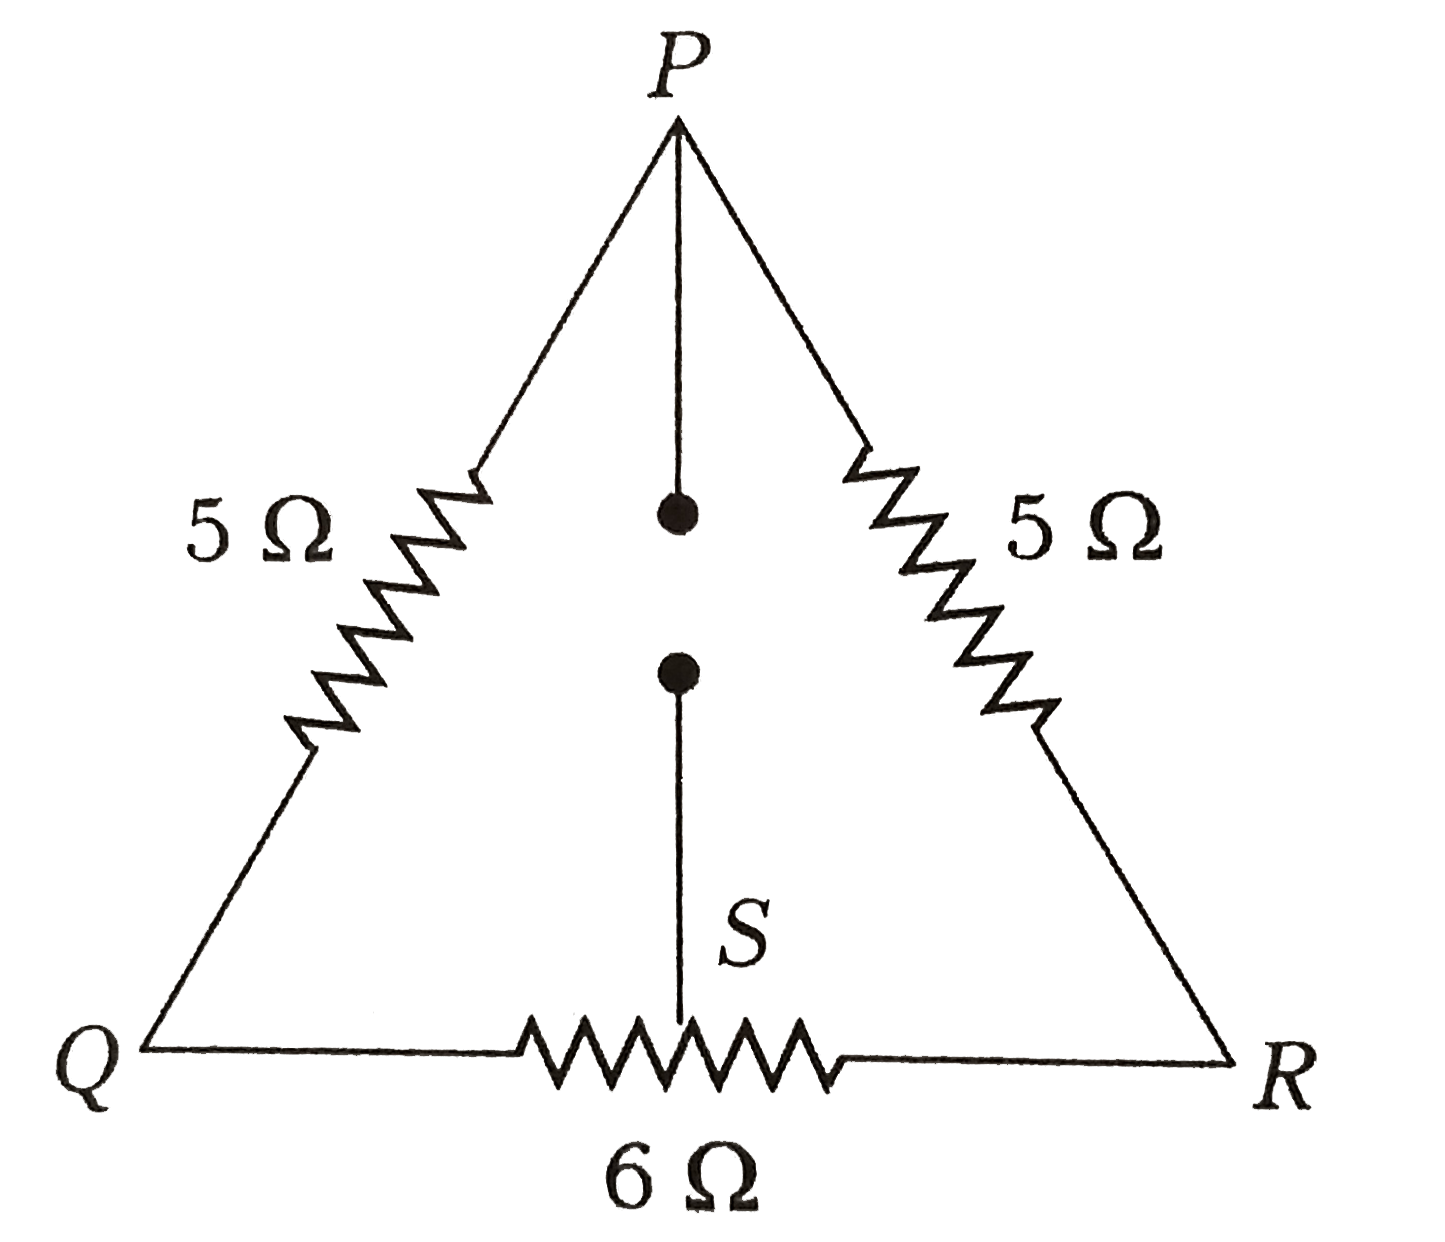 Three resistances 5Omega, 5Omega and 6Omega are connected as shown in figure. If the point S divides the resistance 6Omega into two equal halves, the resistance between points P and S is